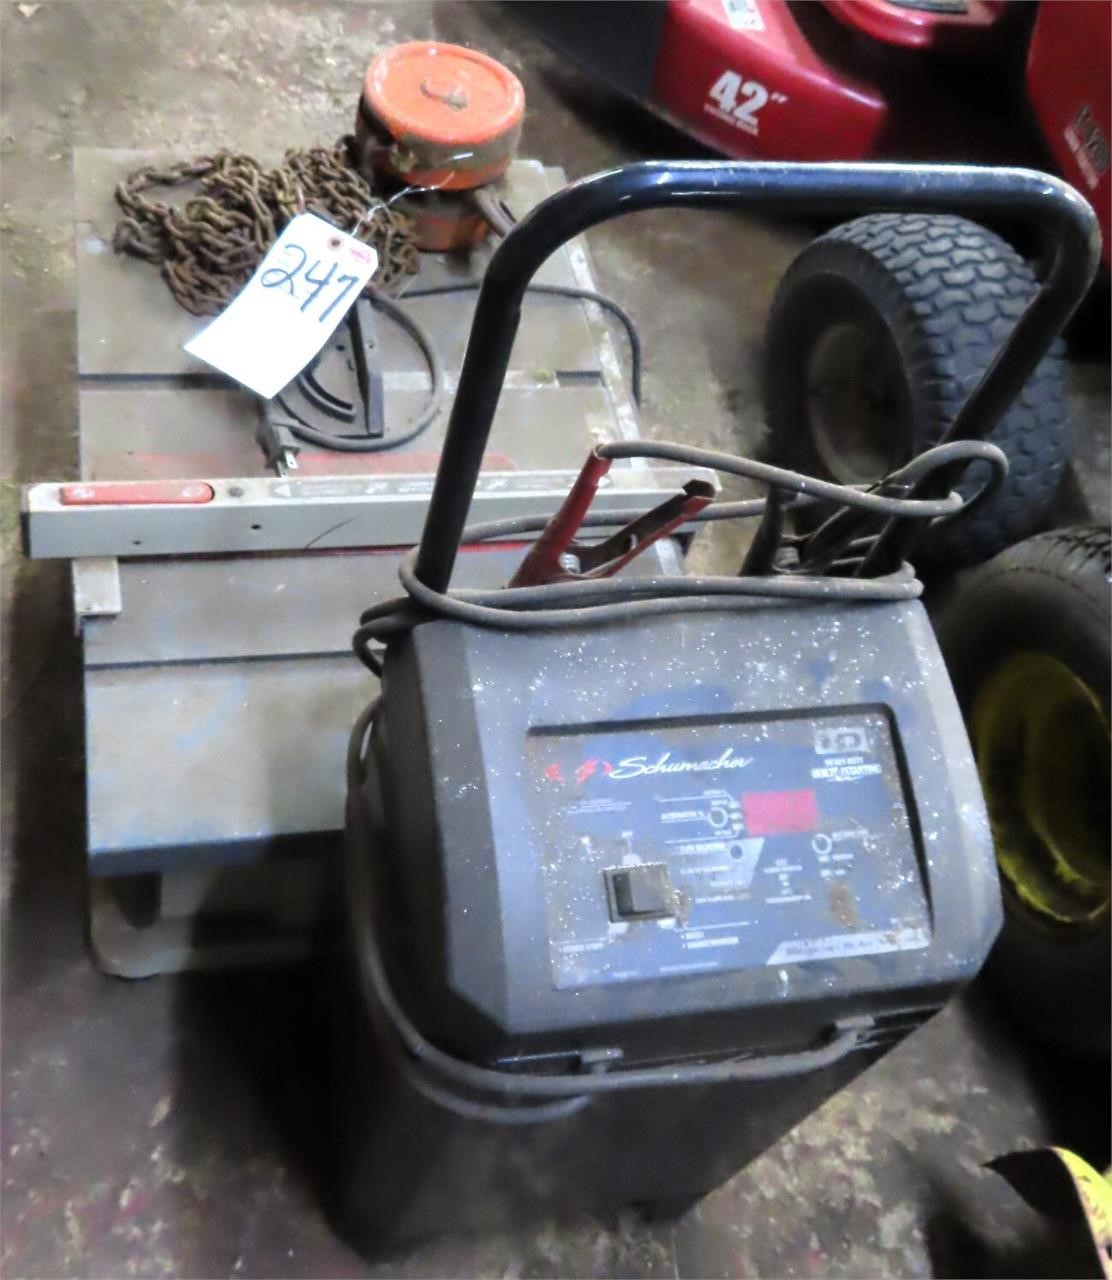 Chain Hoist, Saw and Battery Charger. All Untested